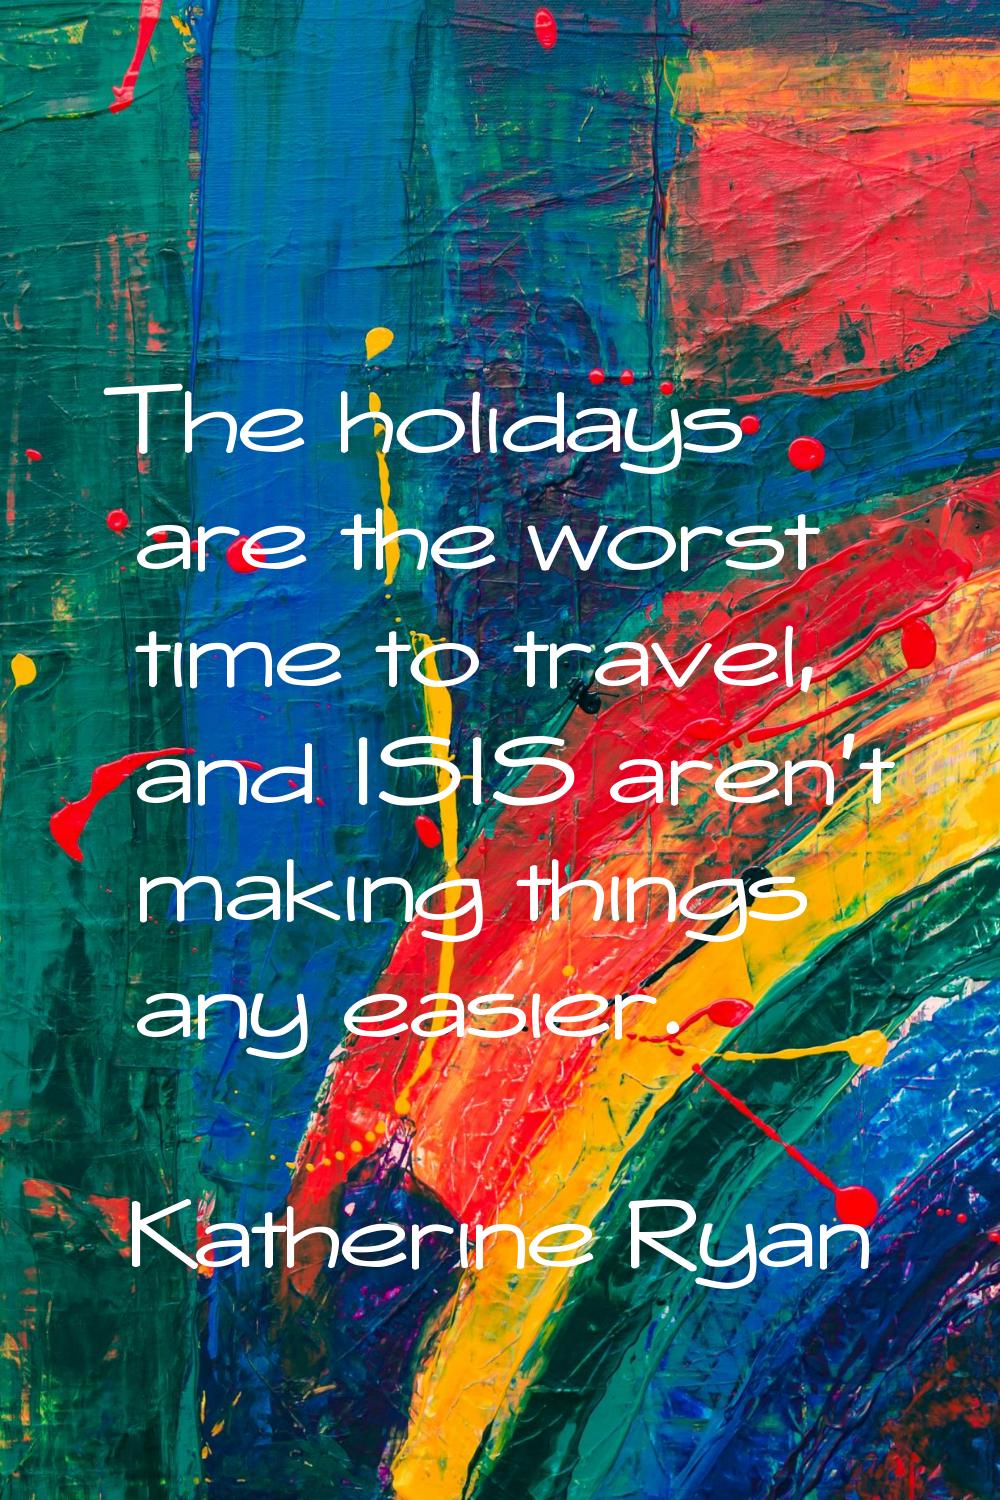 The holidays are the worst time to travel, and ISIS aren't making things any easier.